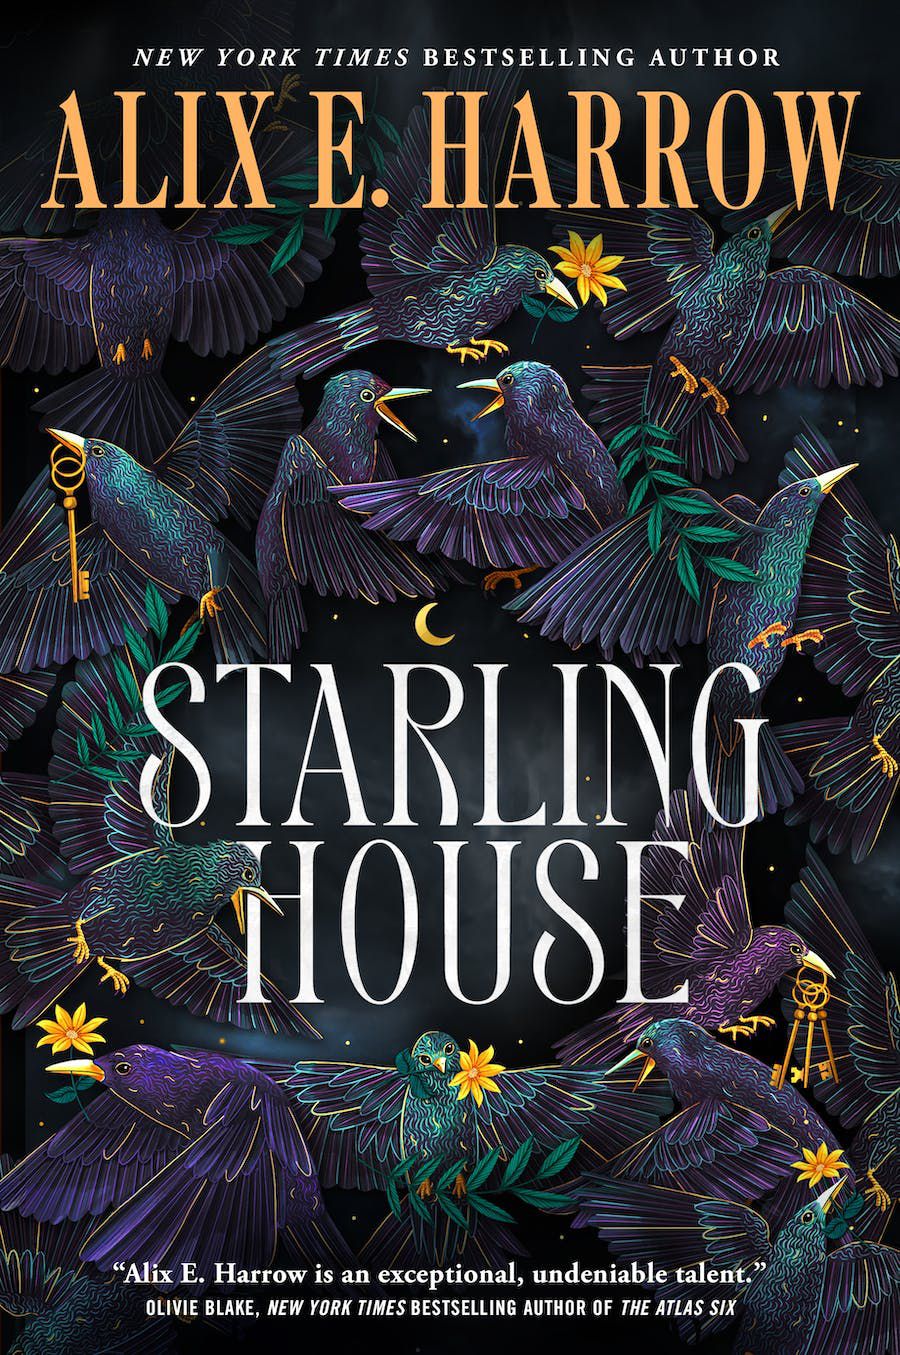 Cover art for Alix E. Harrow’s Starling House, which features a ton of starling birds, some with keys in their mouths, some with flowers.